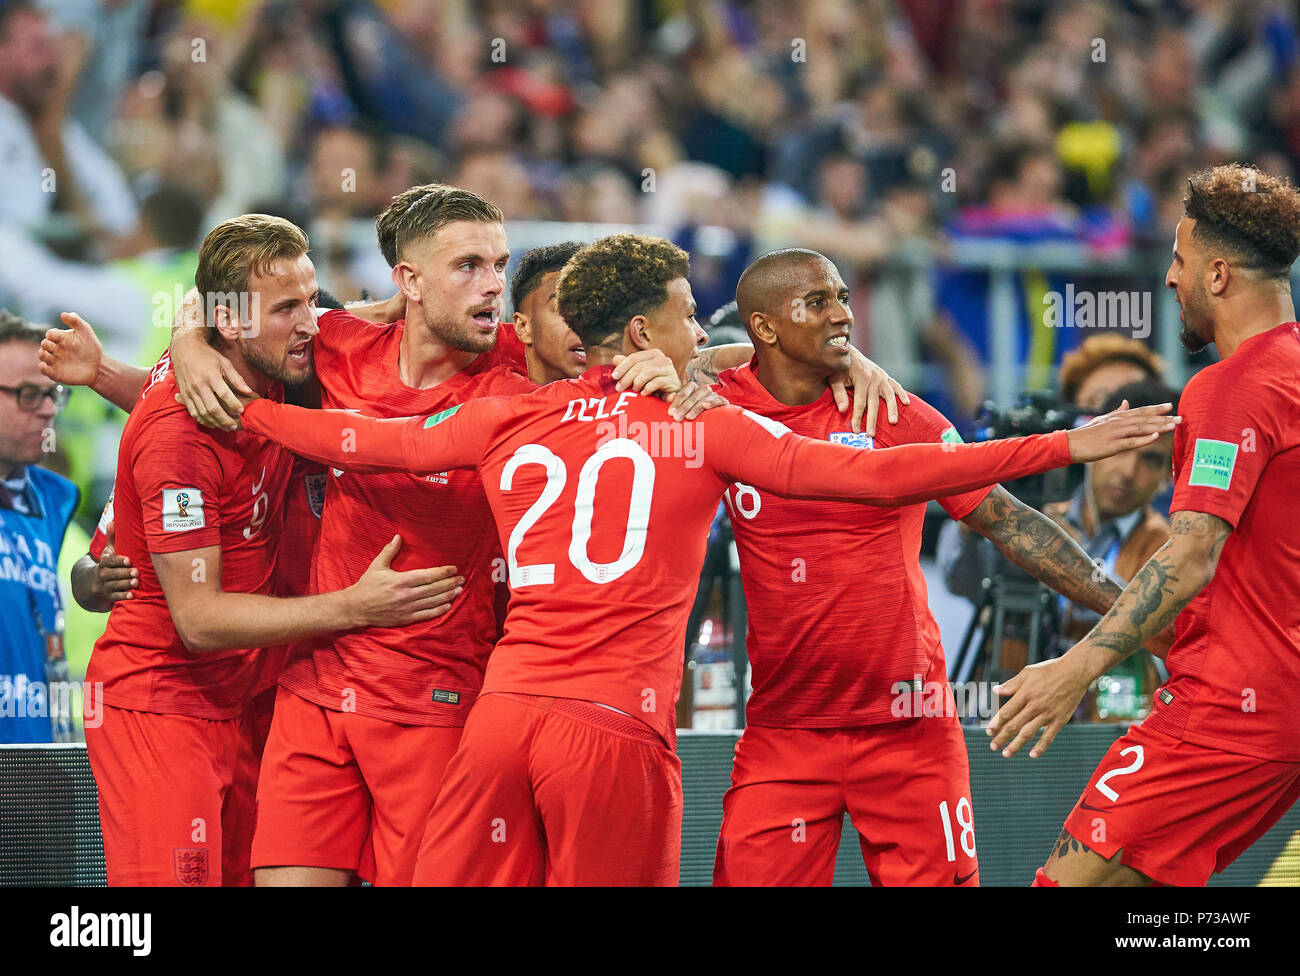 England- Columbia, Soccer, Moscow, July 03, 2018 Harry KANE, England 9    celebrates his goal 1-0   celebrates his goal with Dele ALLI, ENG 20 Kyle WALKER, England 2 Ashley YOUNG, England 18 John STONES, England 5 Jesse LINGARD, England 7 Raheem STERLING, England 10  ENGLAND - COLUMBIA 1-1, 4-3 after penalty shoot-out FIFA WORLD CUP 2018 RUSSIA, Season 2018/2019,  July 03, 2018 S p a r t a k Stadium in Moscow, Russia. © Peter Schatz / Alamy Live News Stock Photo